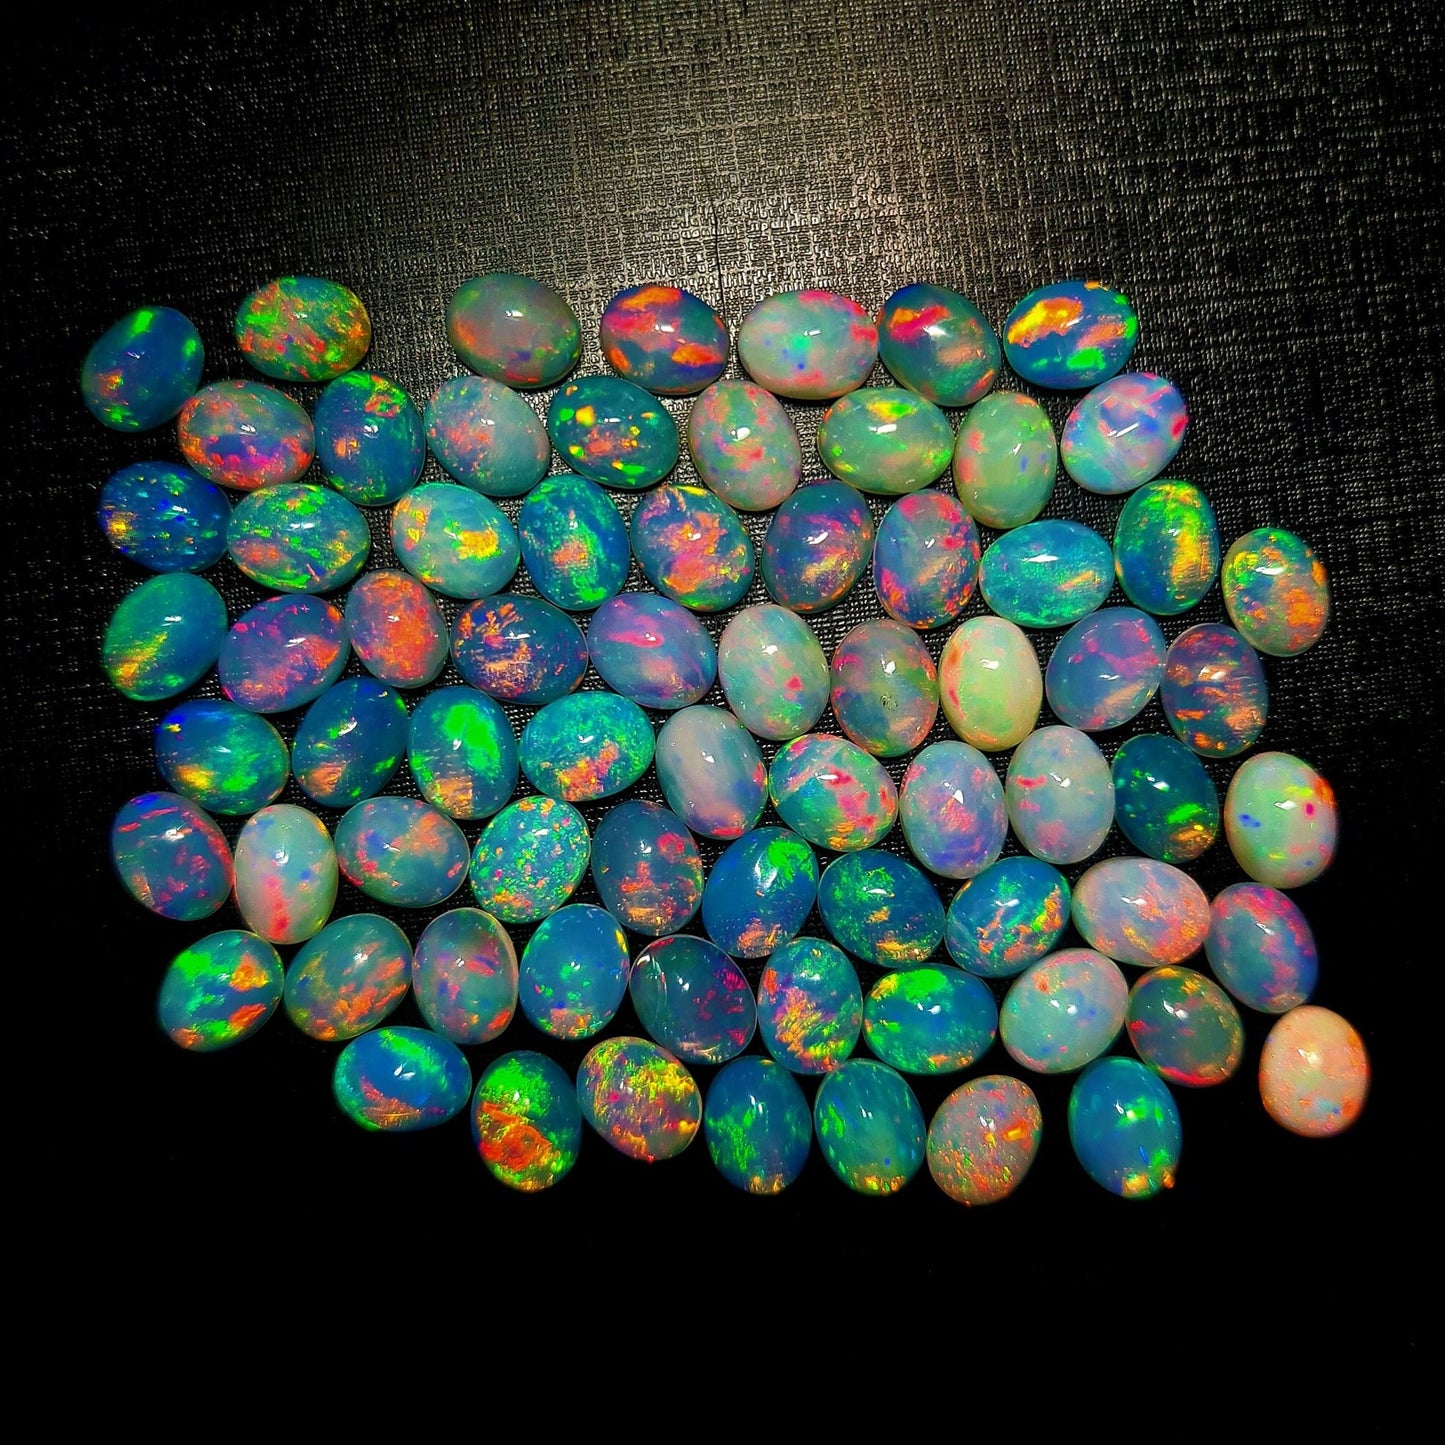 AAA Quality Natural Ethiopian Opal 7x9 mm Oval Gemstone Cabochon, Calibrated Opal Stone, Multi Fire Opal Loose Stone For Jewelry Making. (Natural)